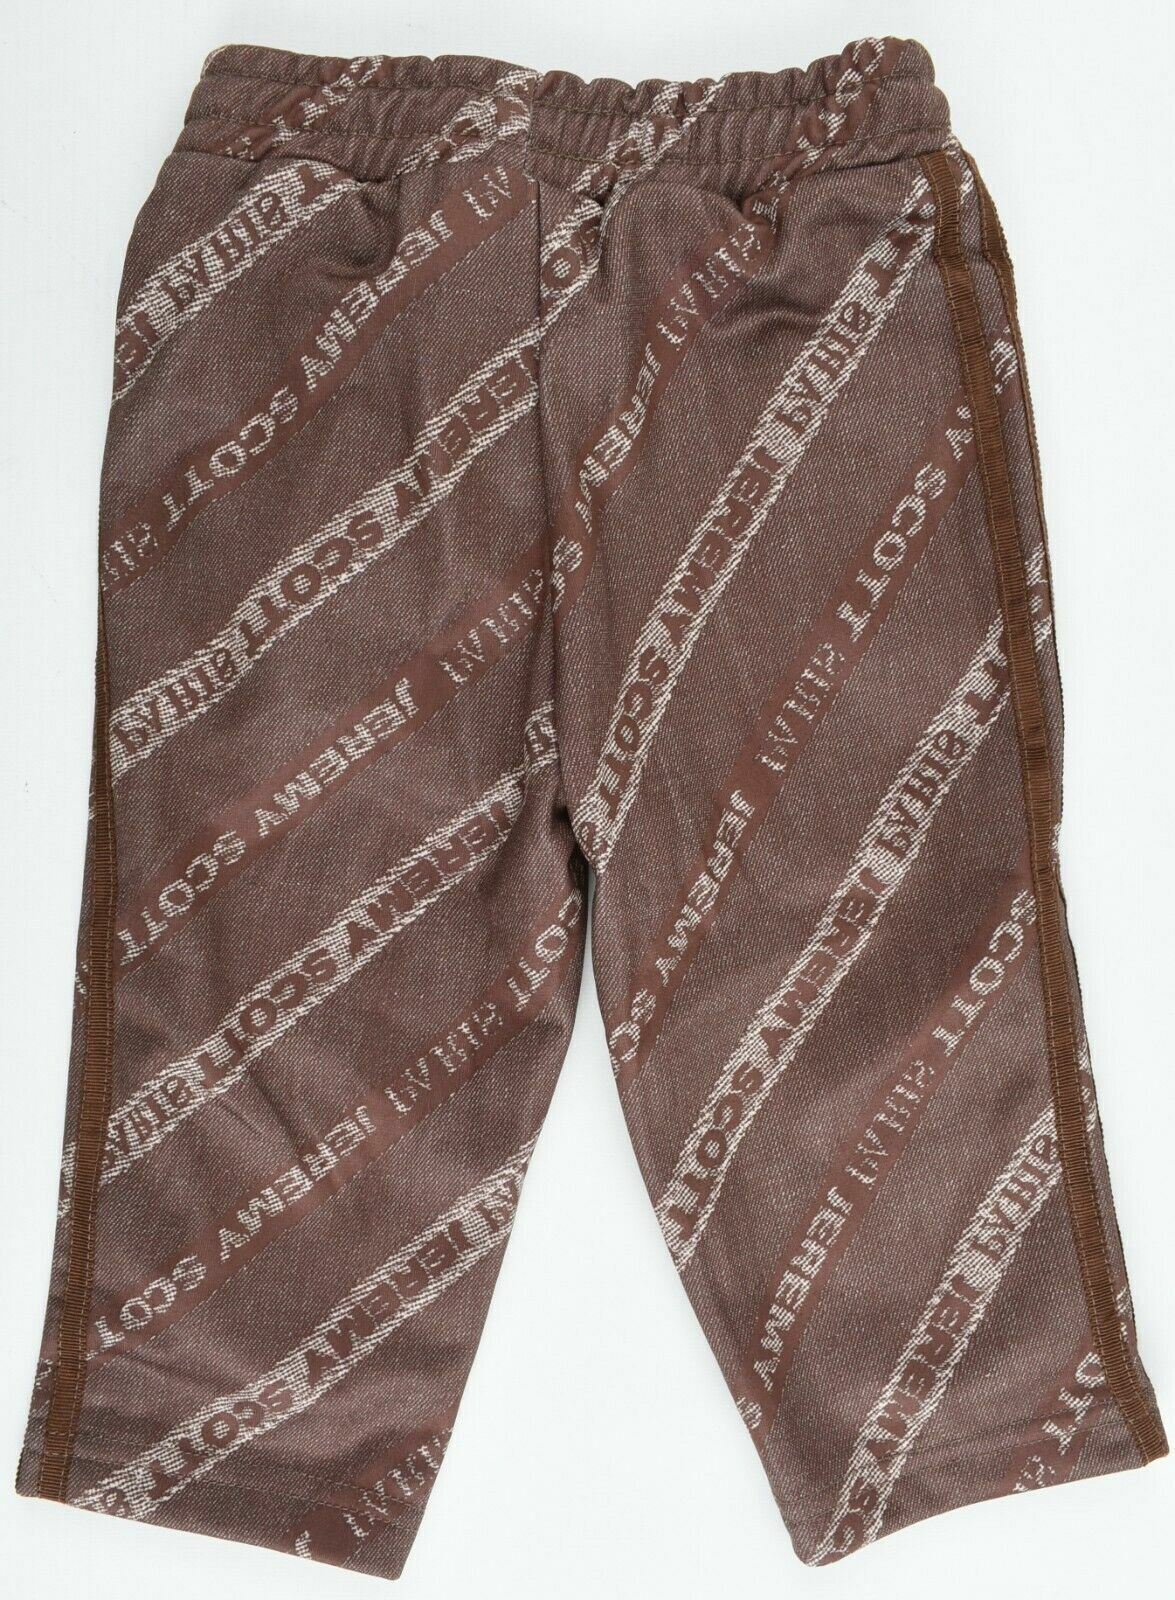 JEREMY SCOTT x ADIDAS Baby Boys'Logo Joggers Trousers Brown 18 m to 24 months